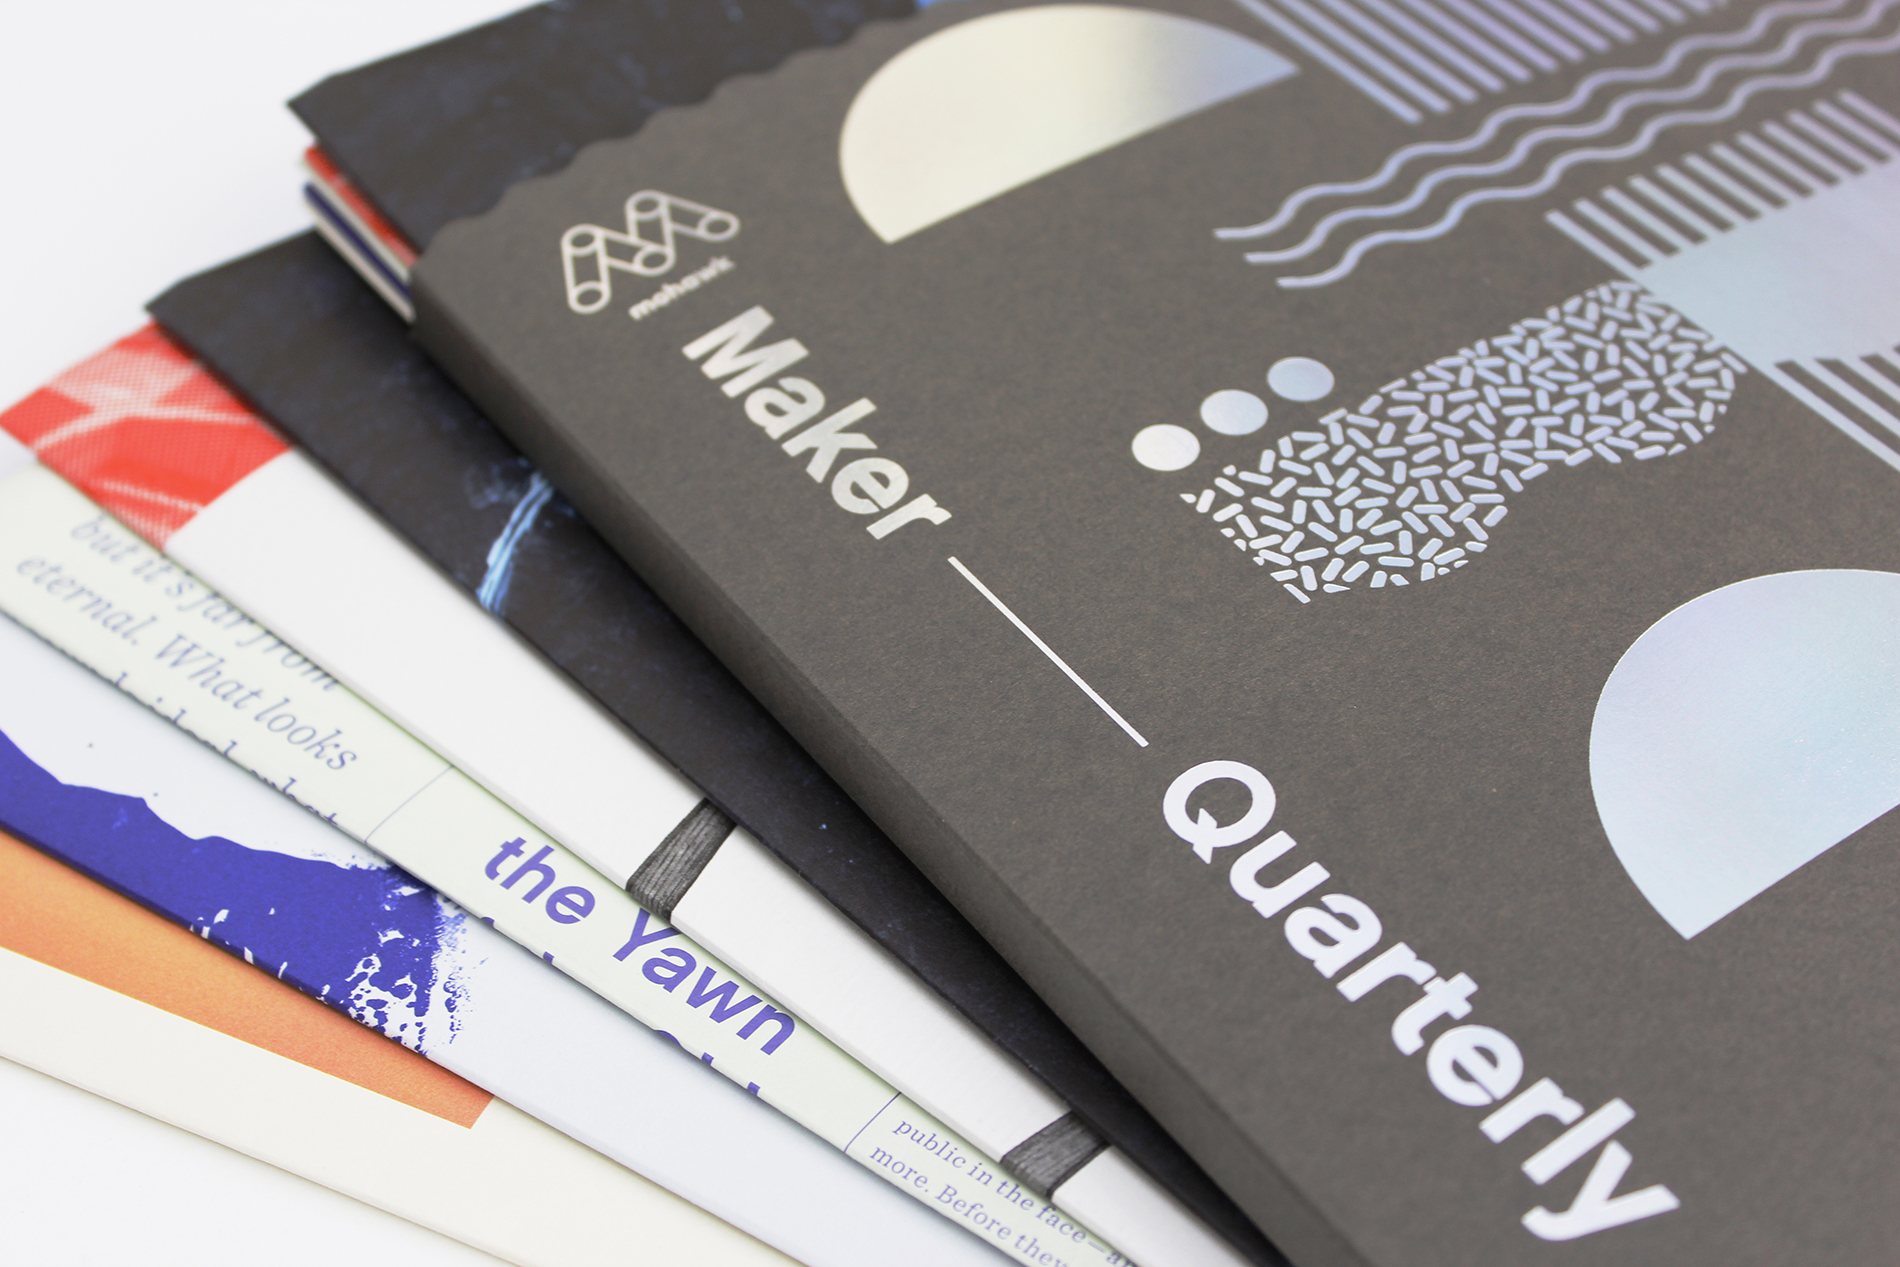 Maker Quarterly 10 and its contents laid out in a fan arrangement